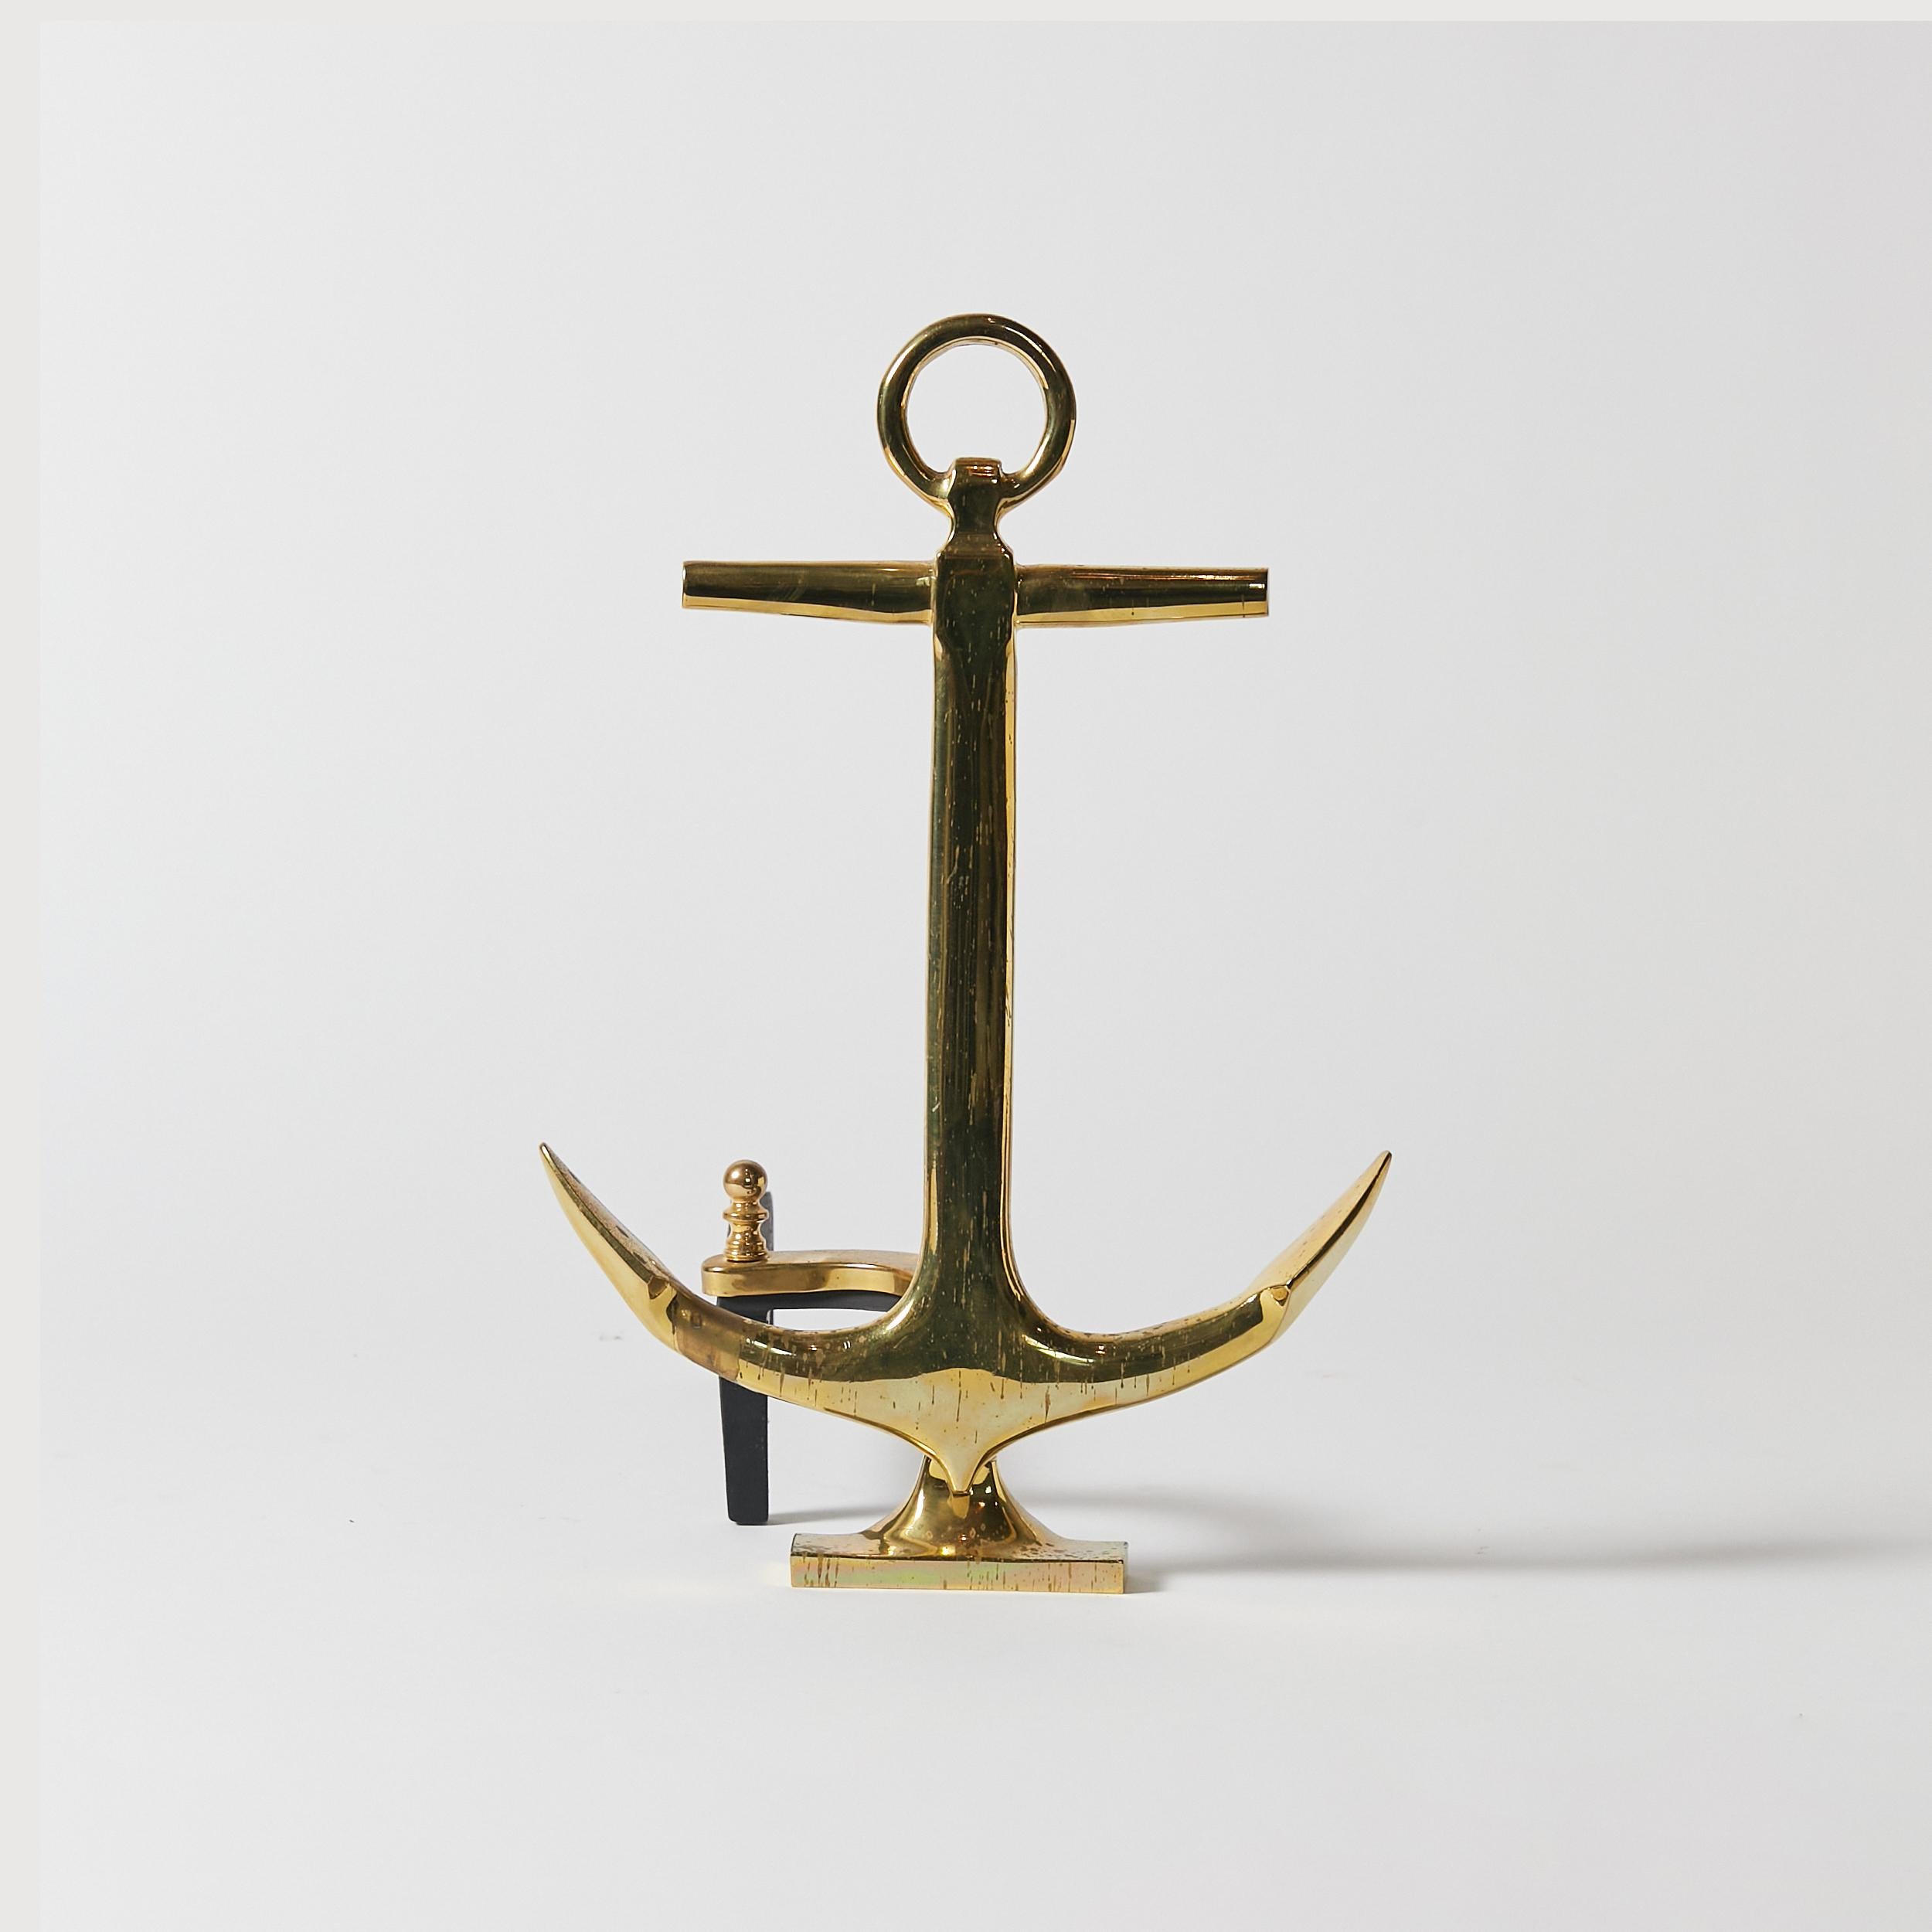 Blackened Pair of 1940 Anchor-Shaped Andirons in Polished Brass For Sale